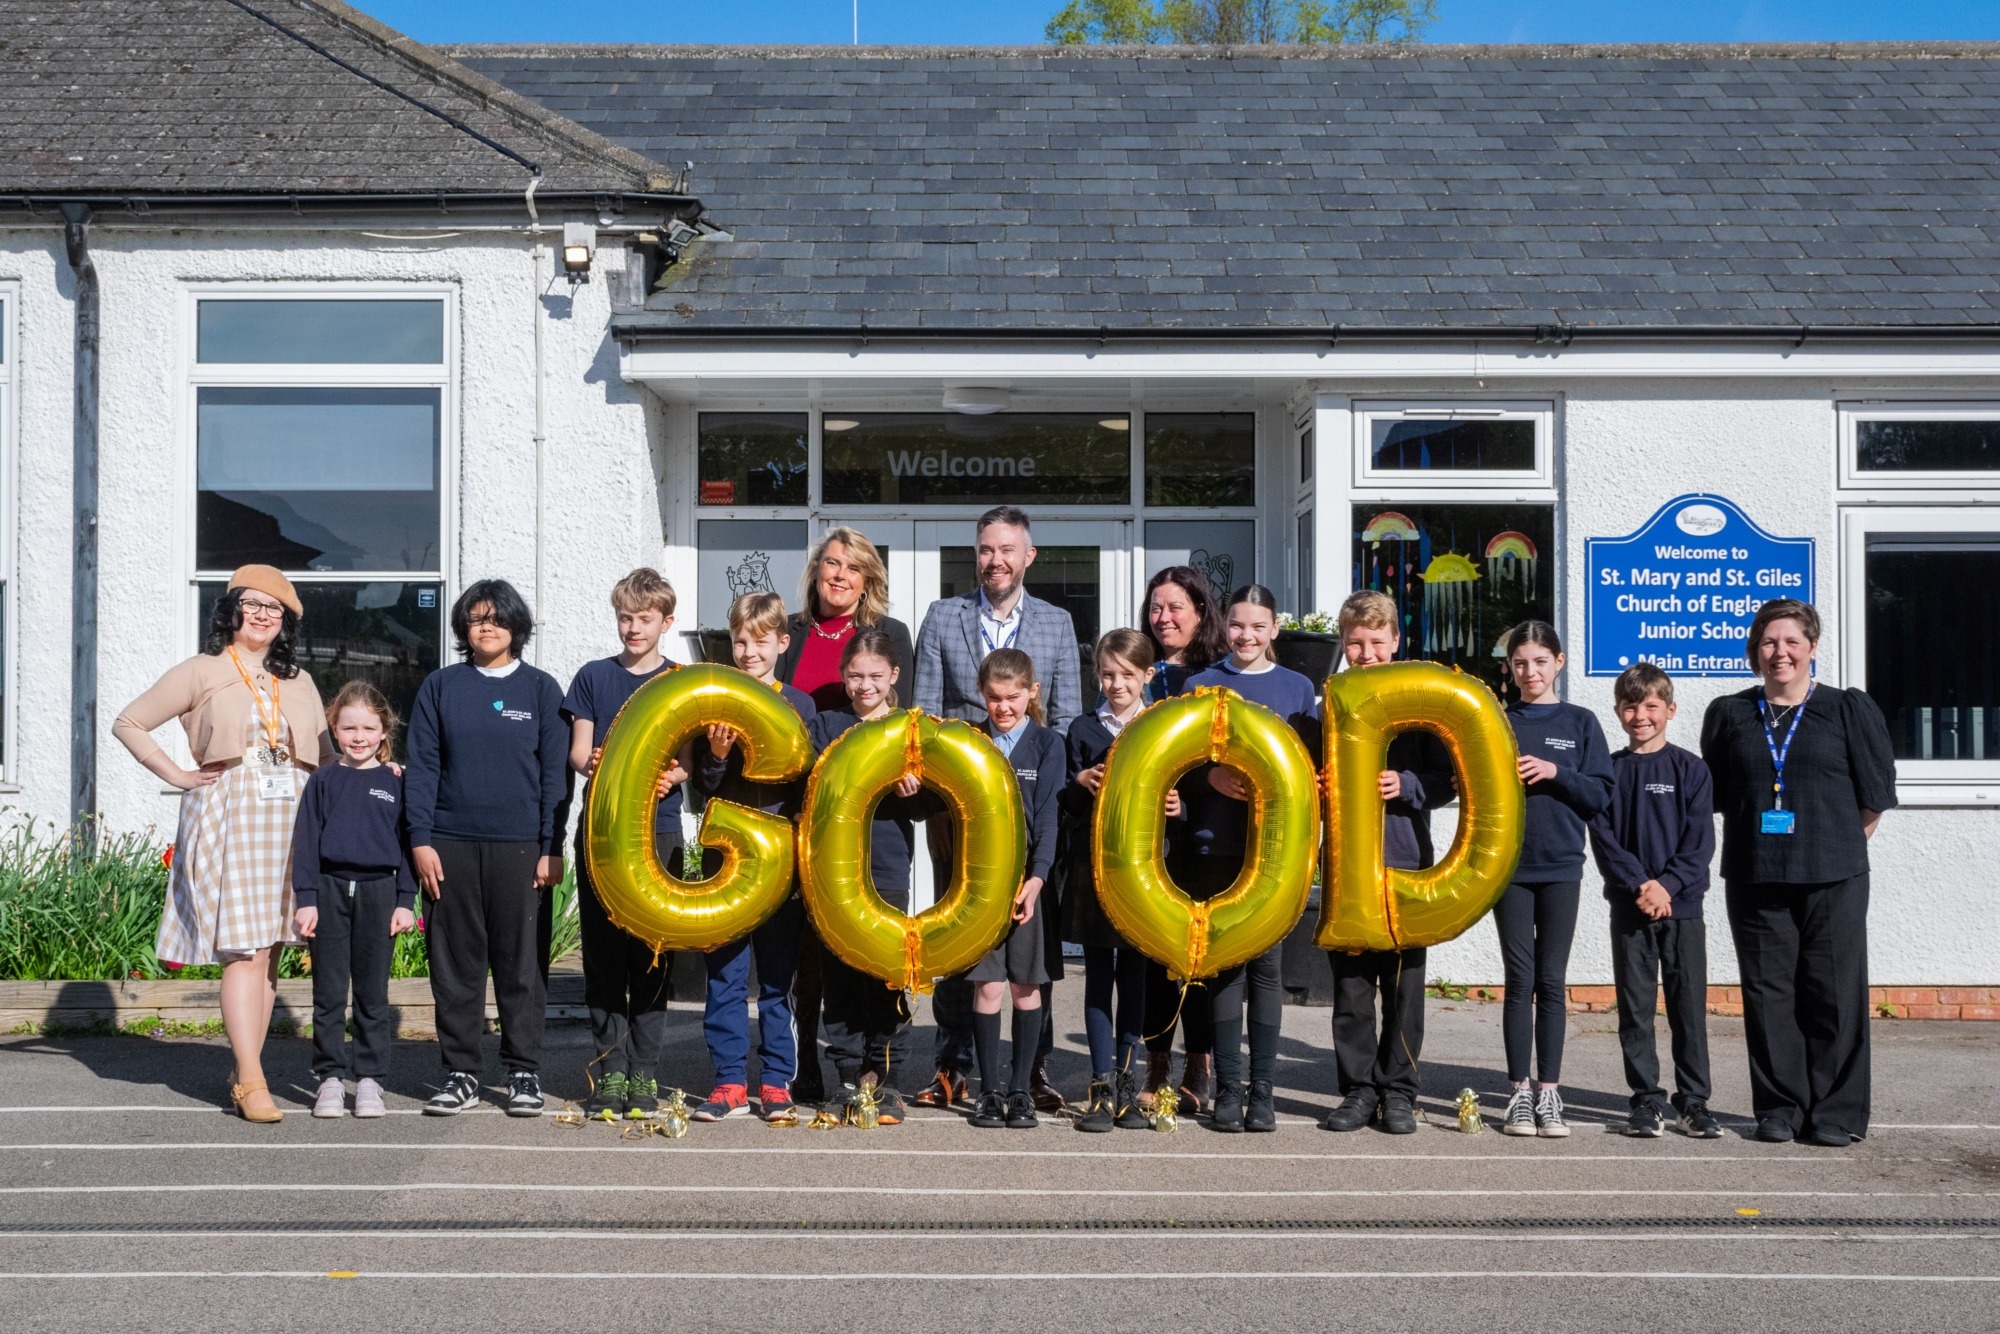 “All pupils now achieve well in a safe, happy and inclusive school”: St Mary & St Giles Church of England School rated ‘Good’ by Ofsted | Northamptonshire Chamber of Commerce